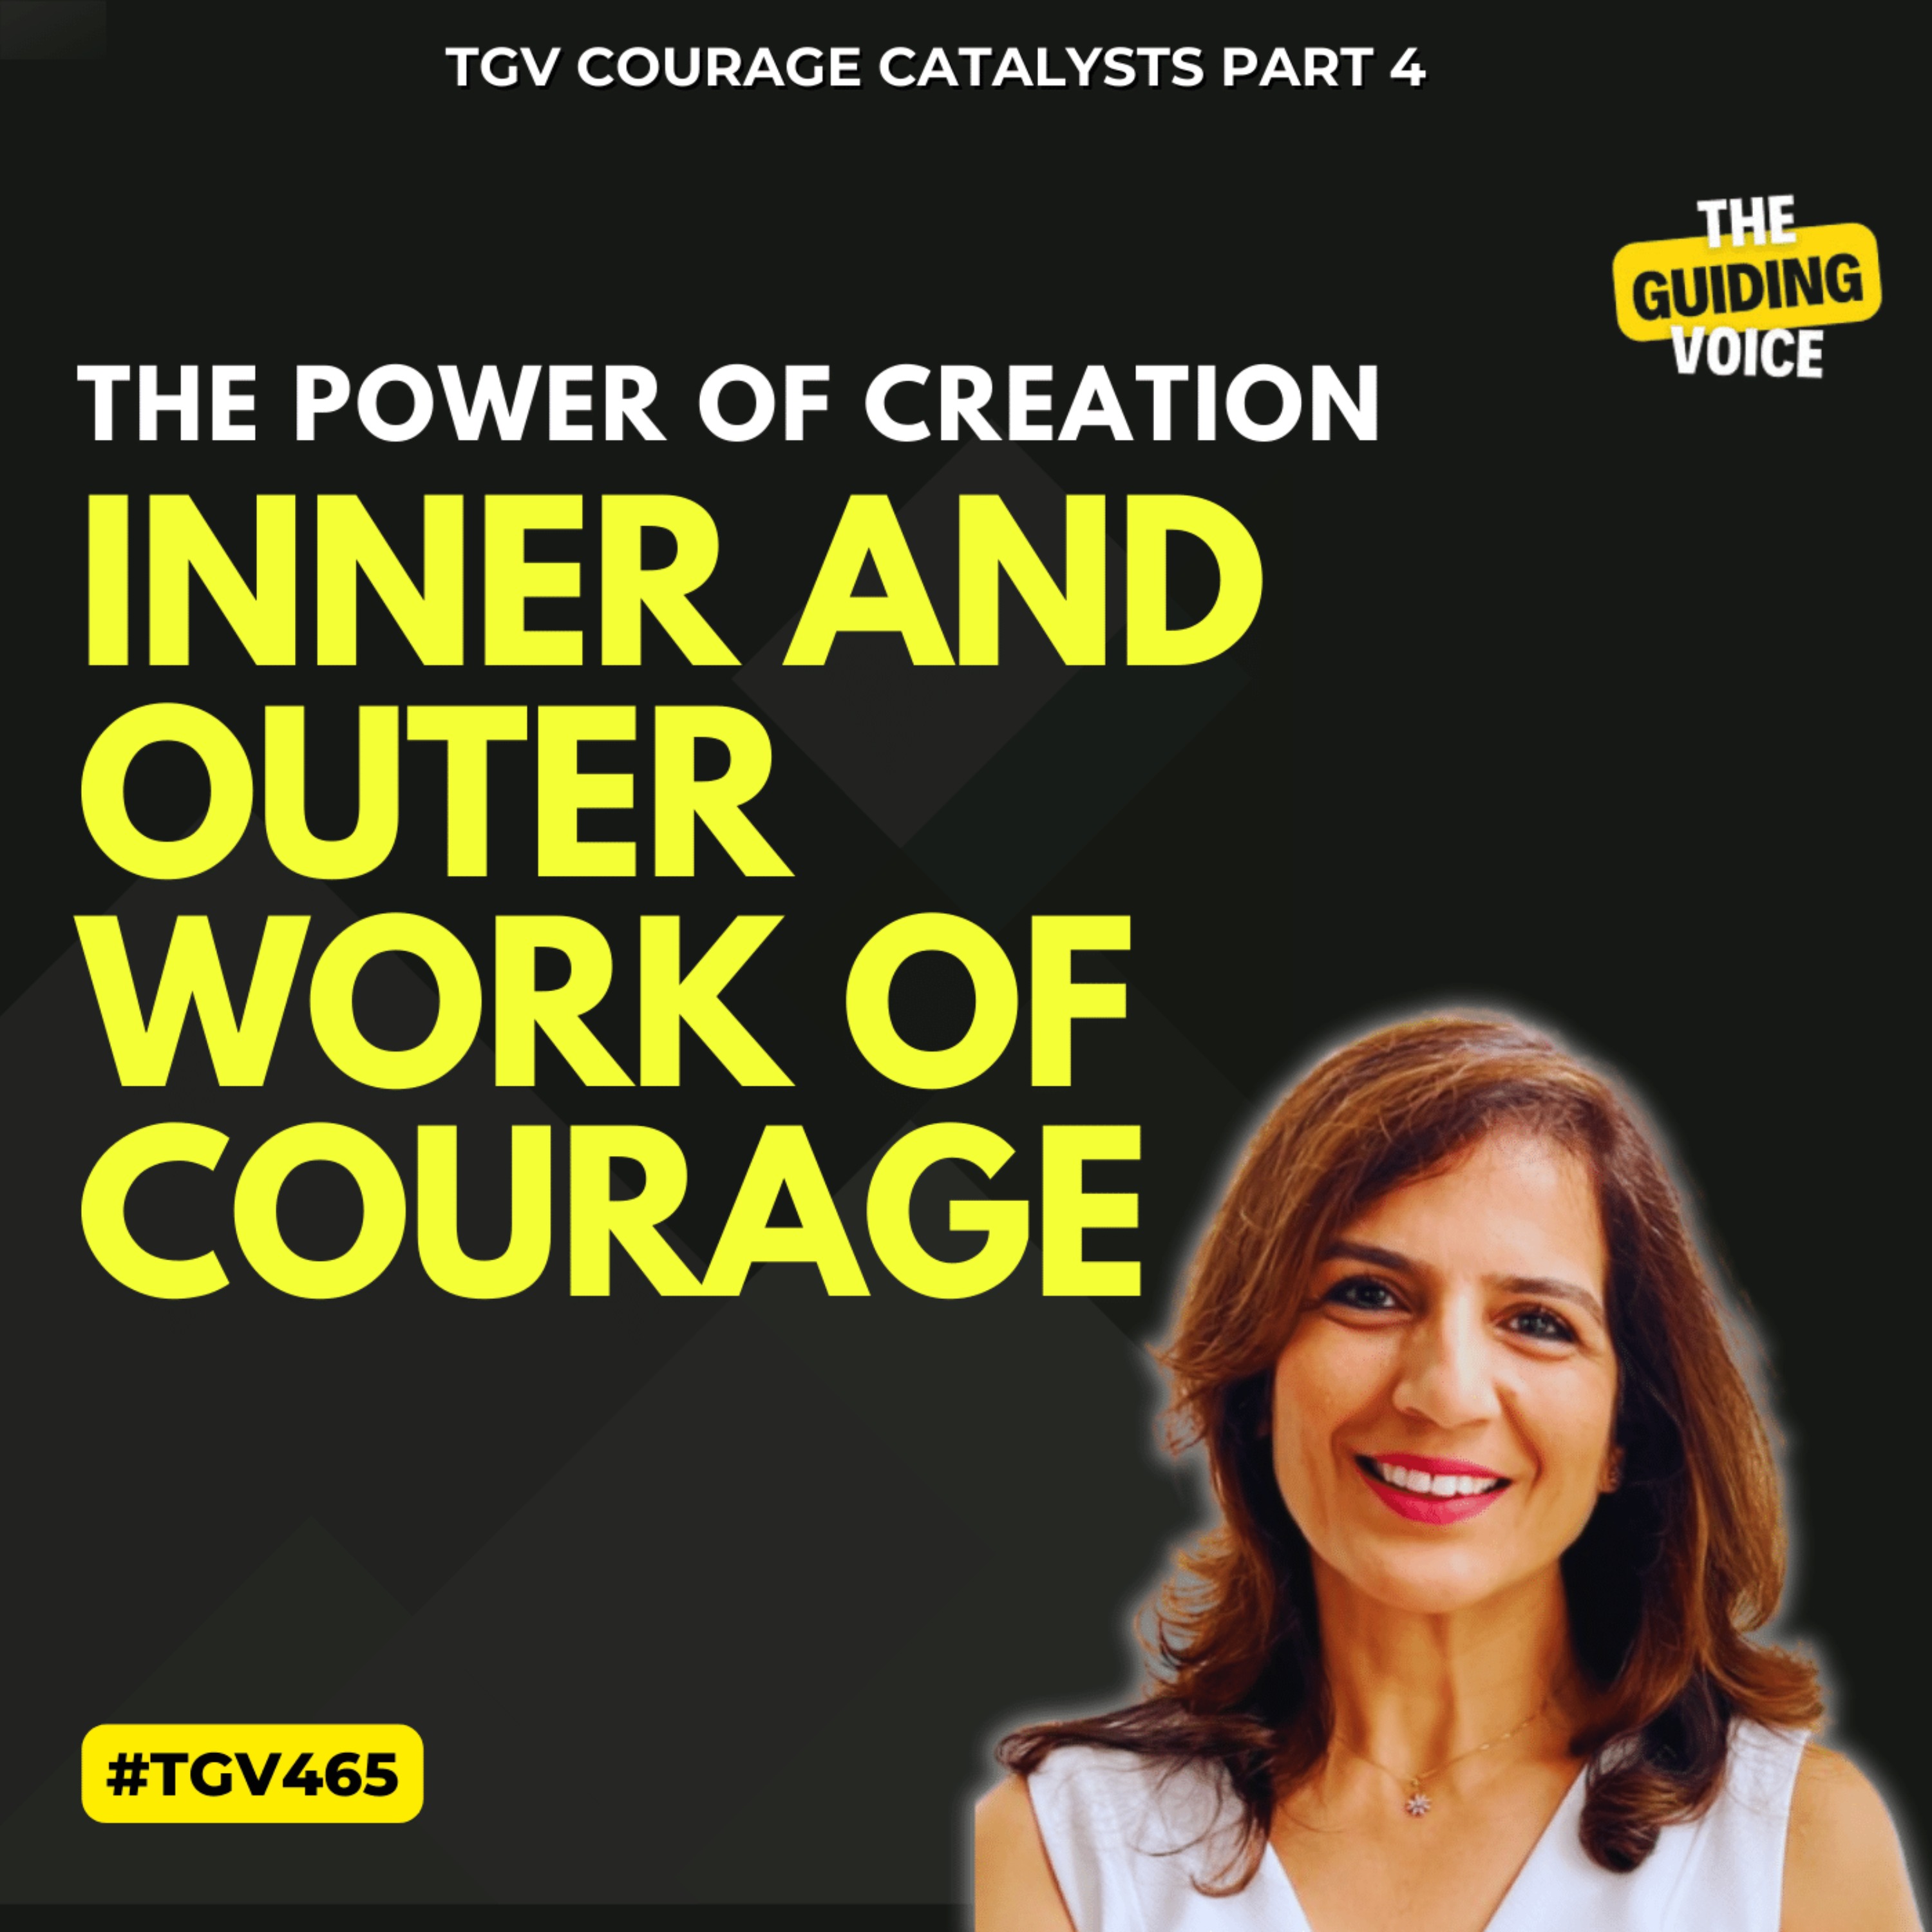 Inner and Outer Work of Courage: The Power of Creation | TGV Courage Catalyst Ep 4 | Farah Ismail | #TGV465